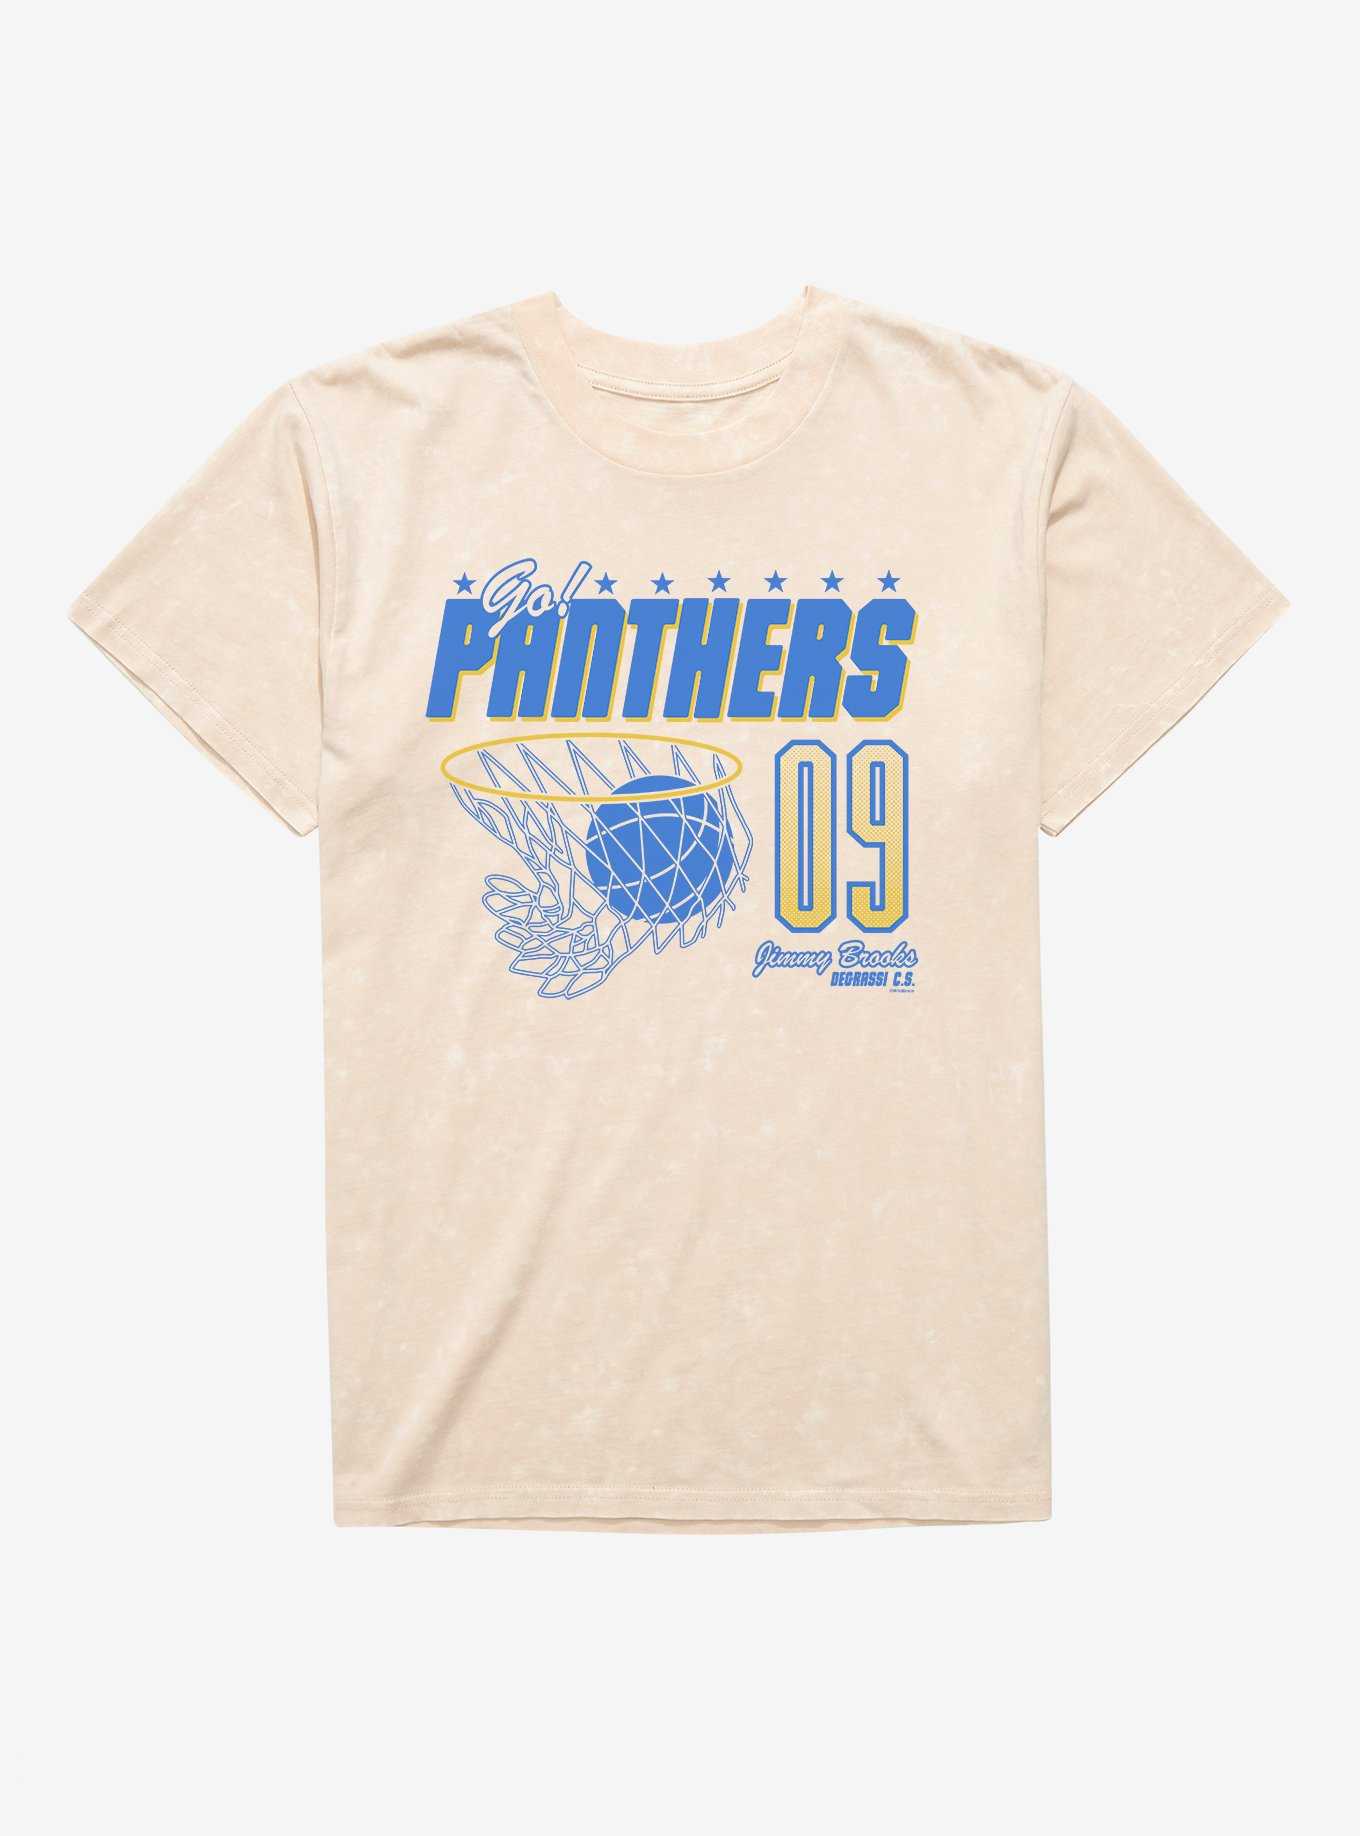 Degrassi: The Next Generation Go Panthers 09 Jimmy Brooks Mineral Wash T-Shirt, , hi-res